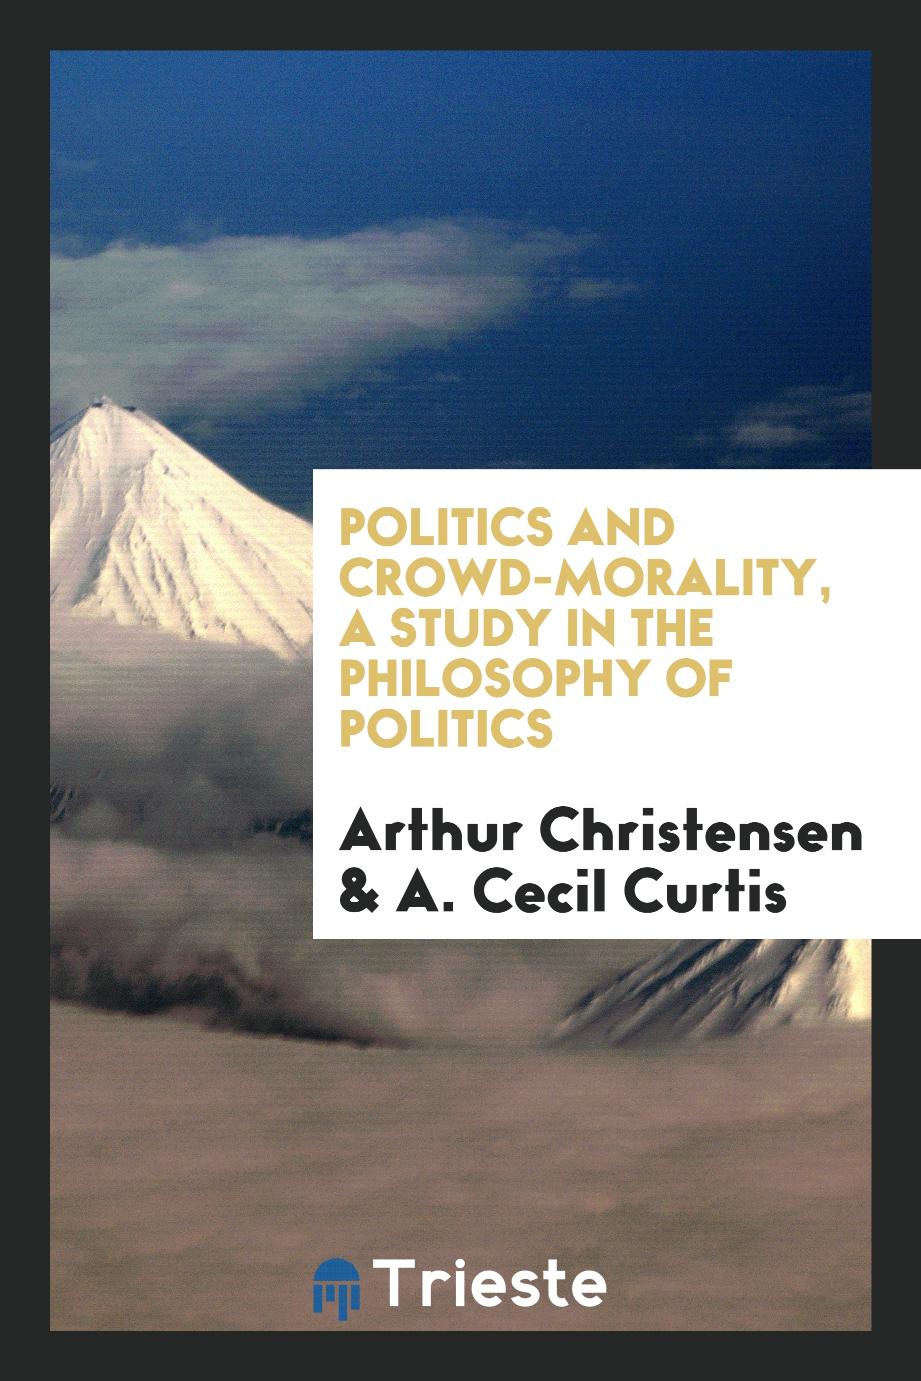 Politics and crowd-morality, a study in the philosophy of politics